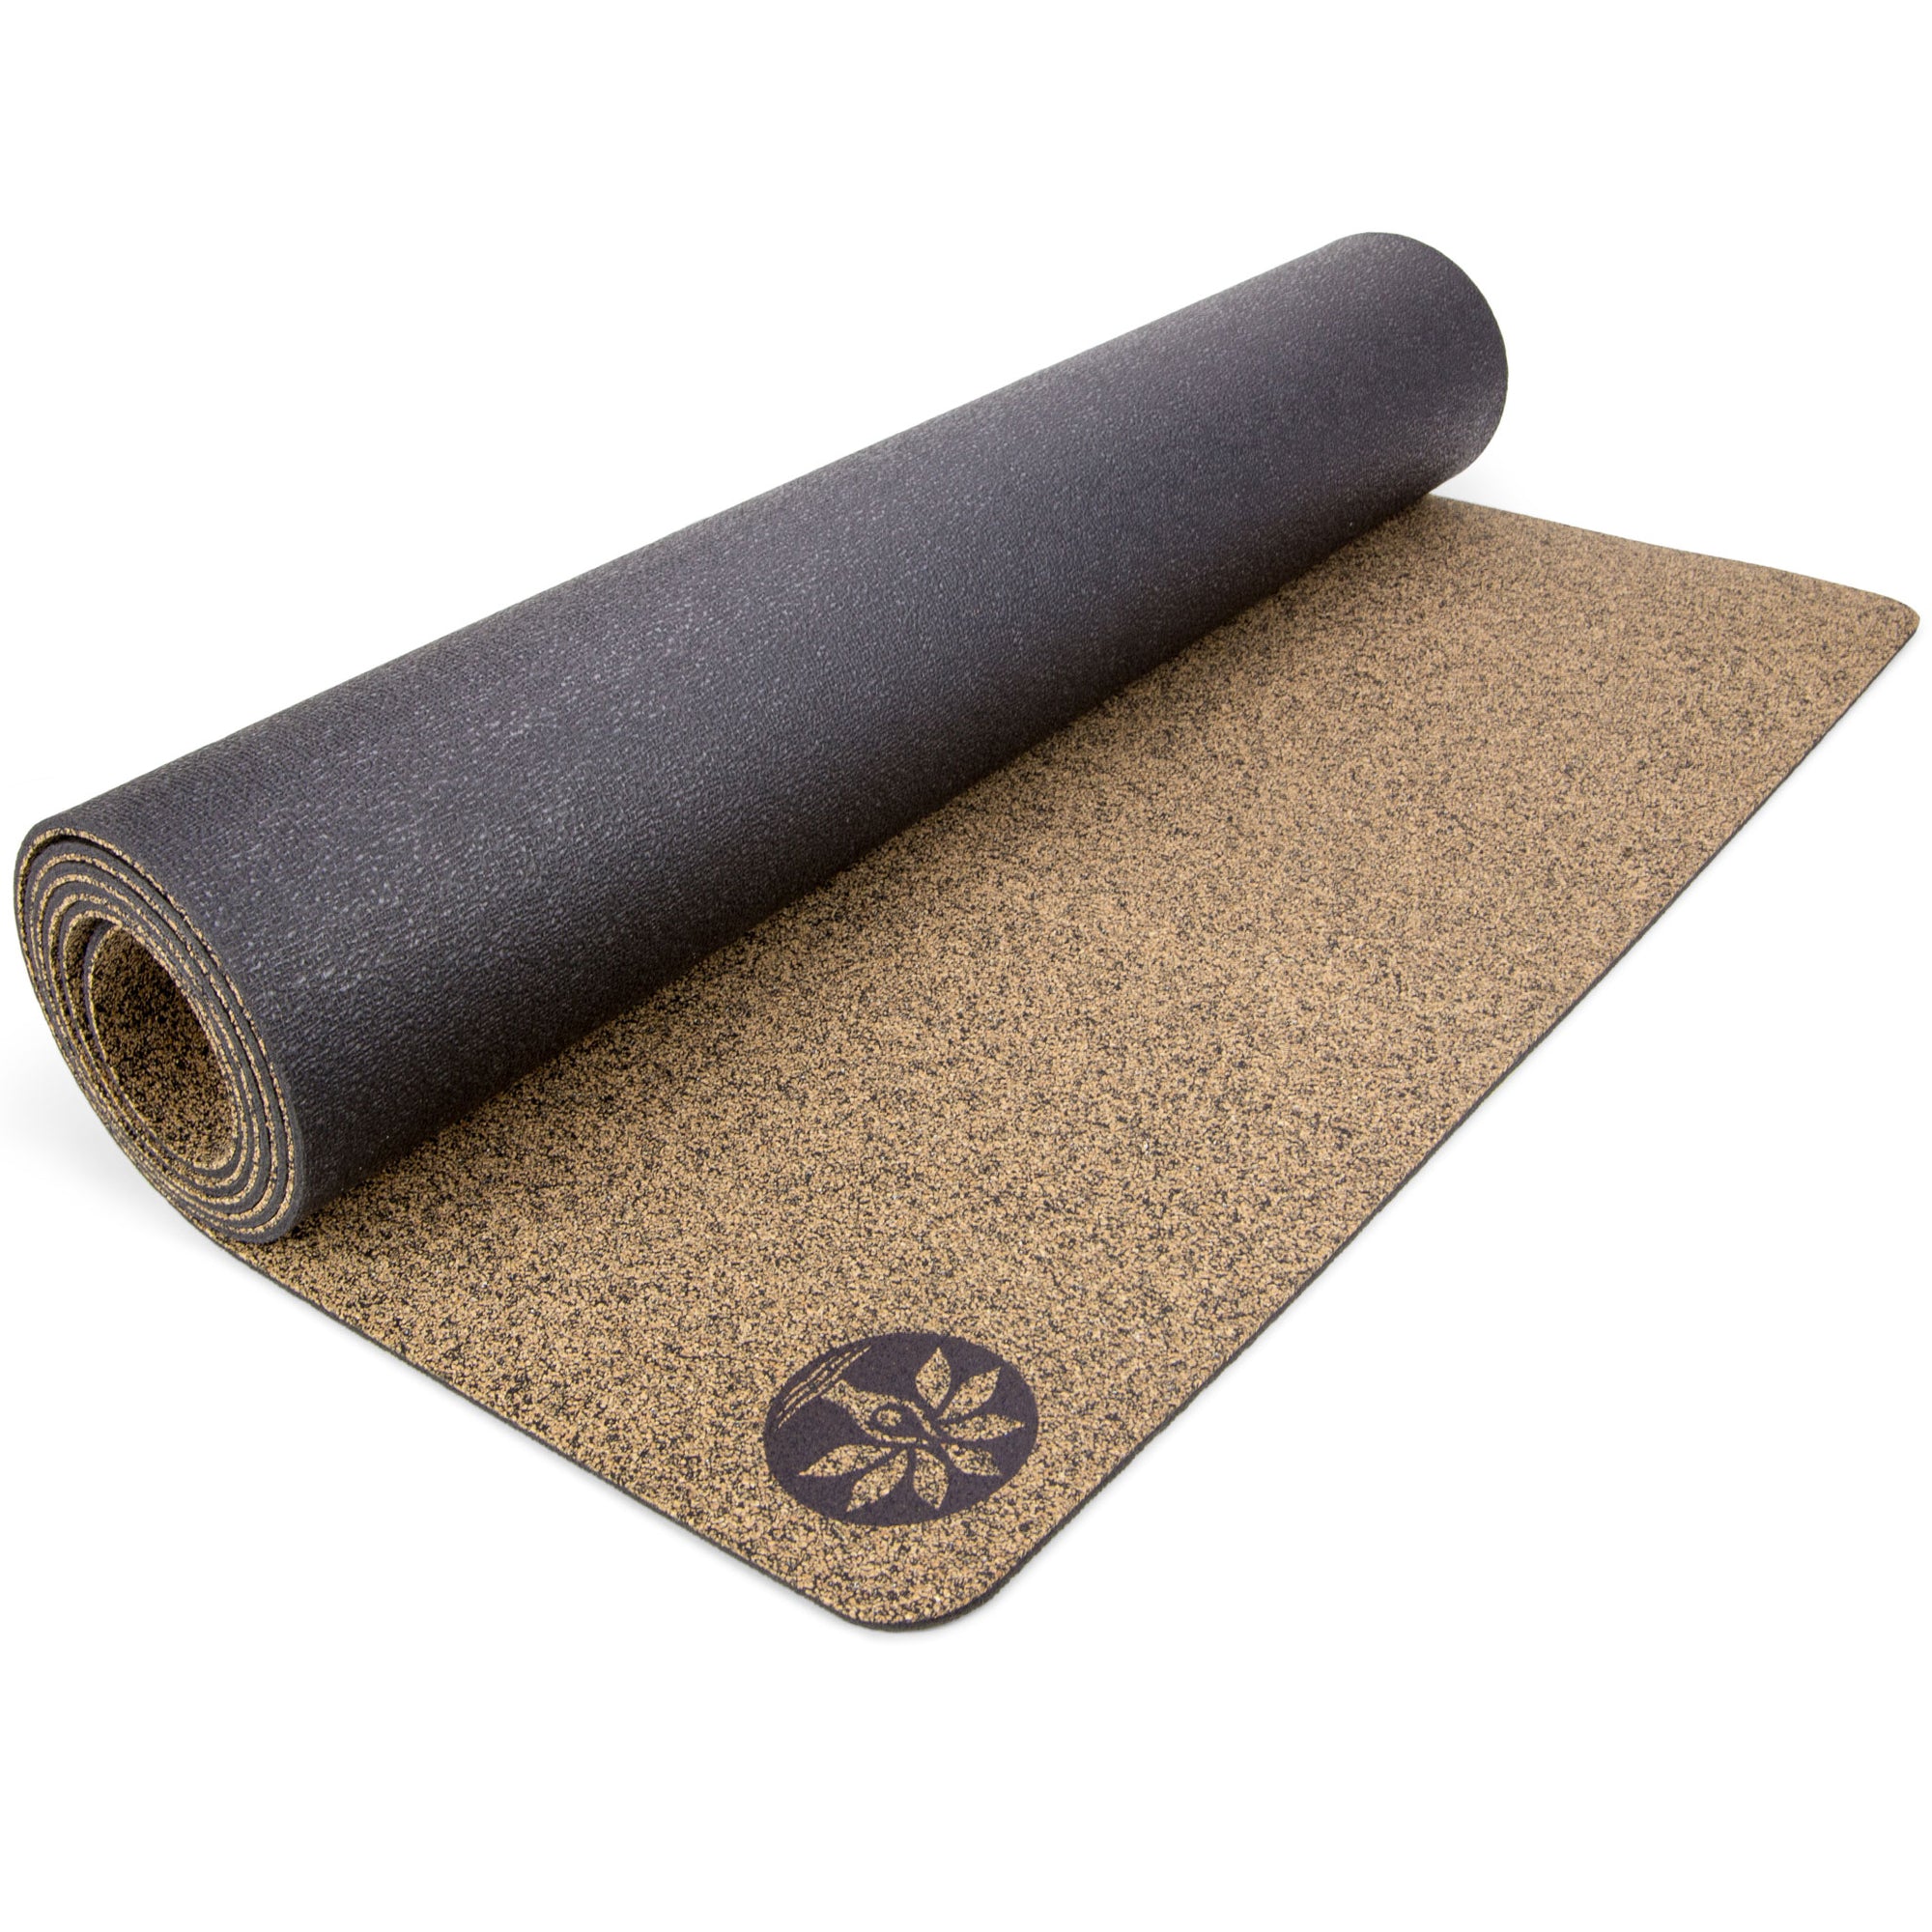 Yos - The Indian Yoga Shop I Buy Best Yoga Props & Accessories Online